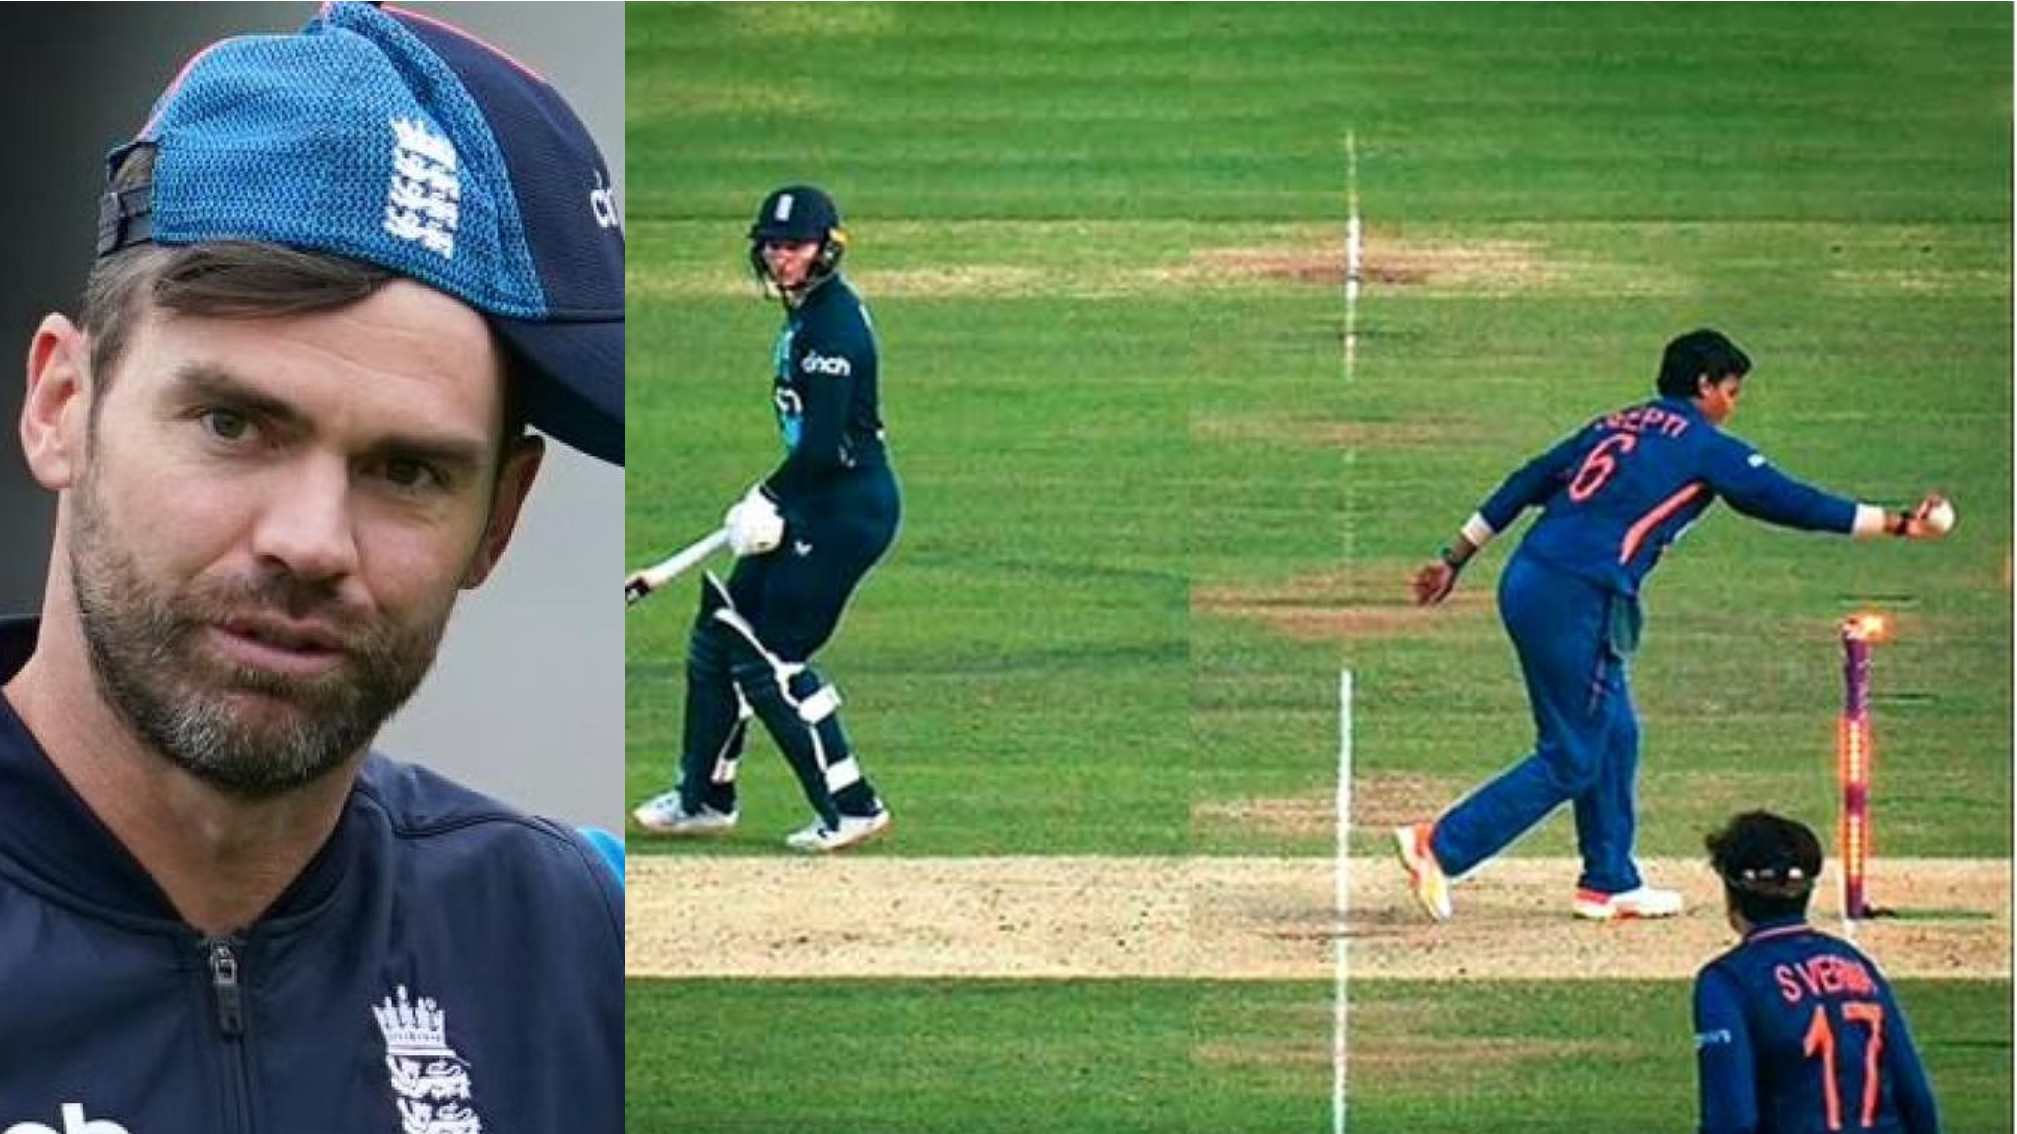 ‘Deepti was never thinking about bowling that ball’- James Anderson opines on Charlie Dean run out